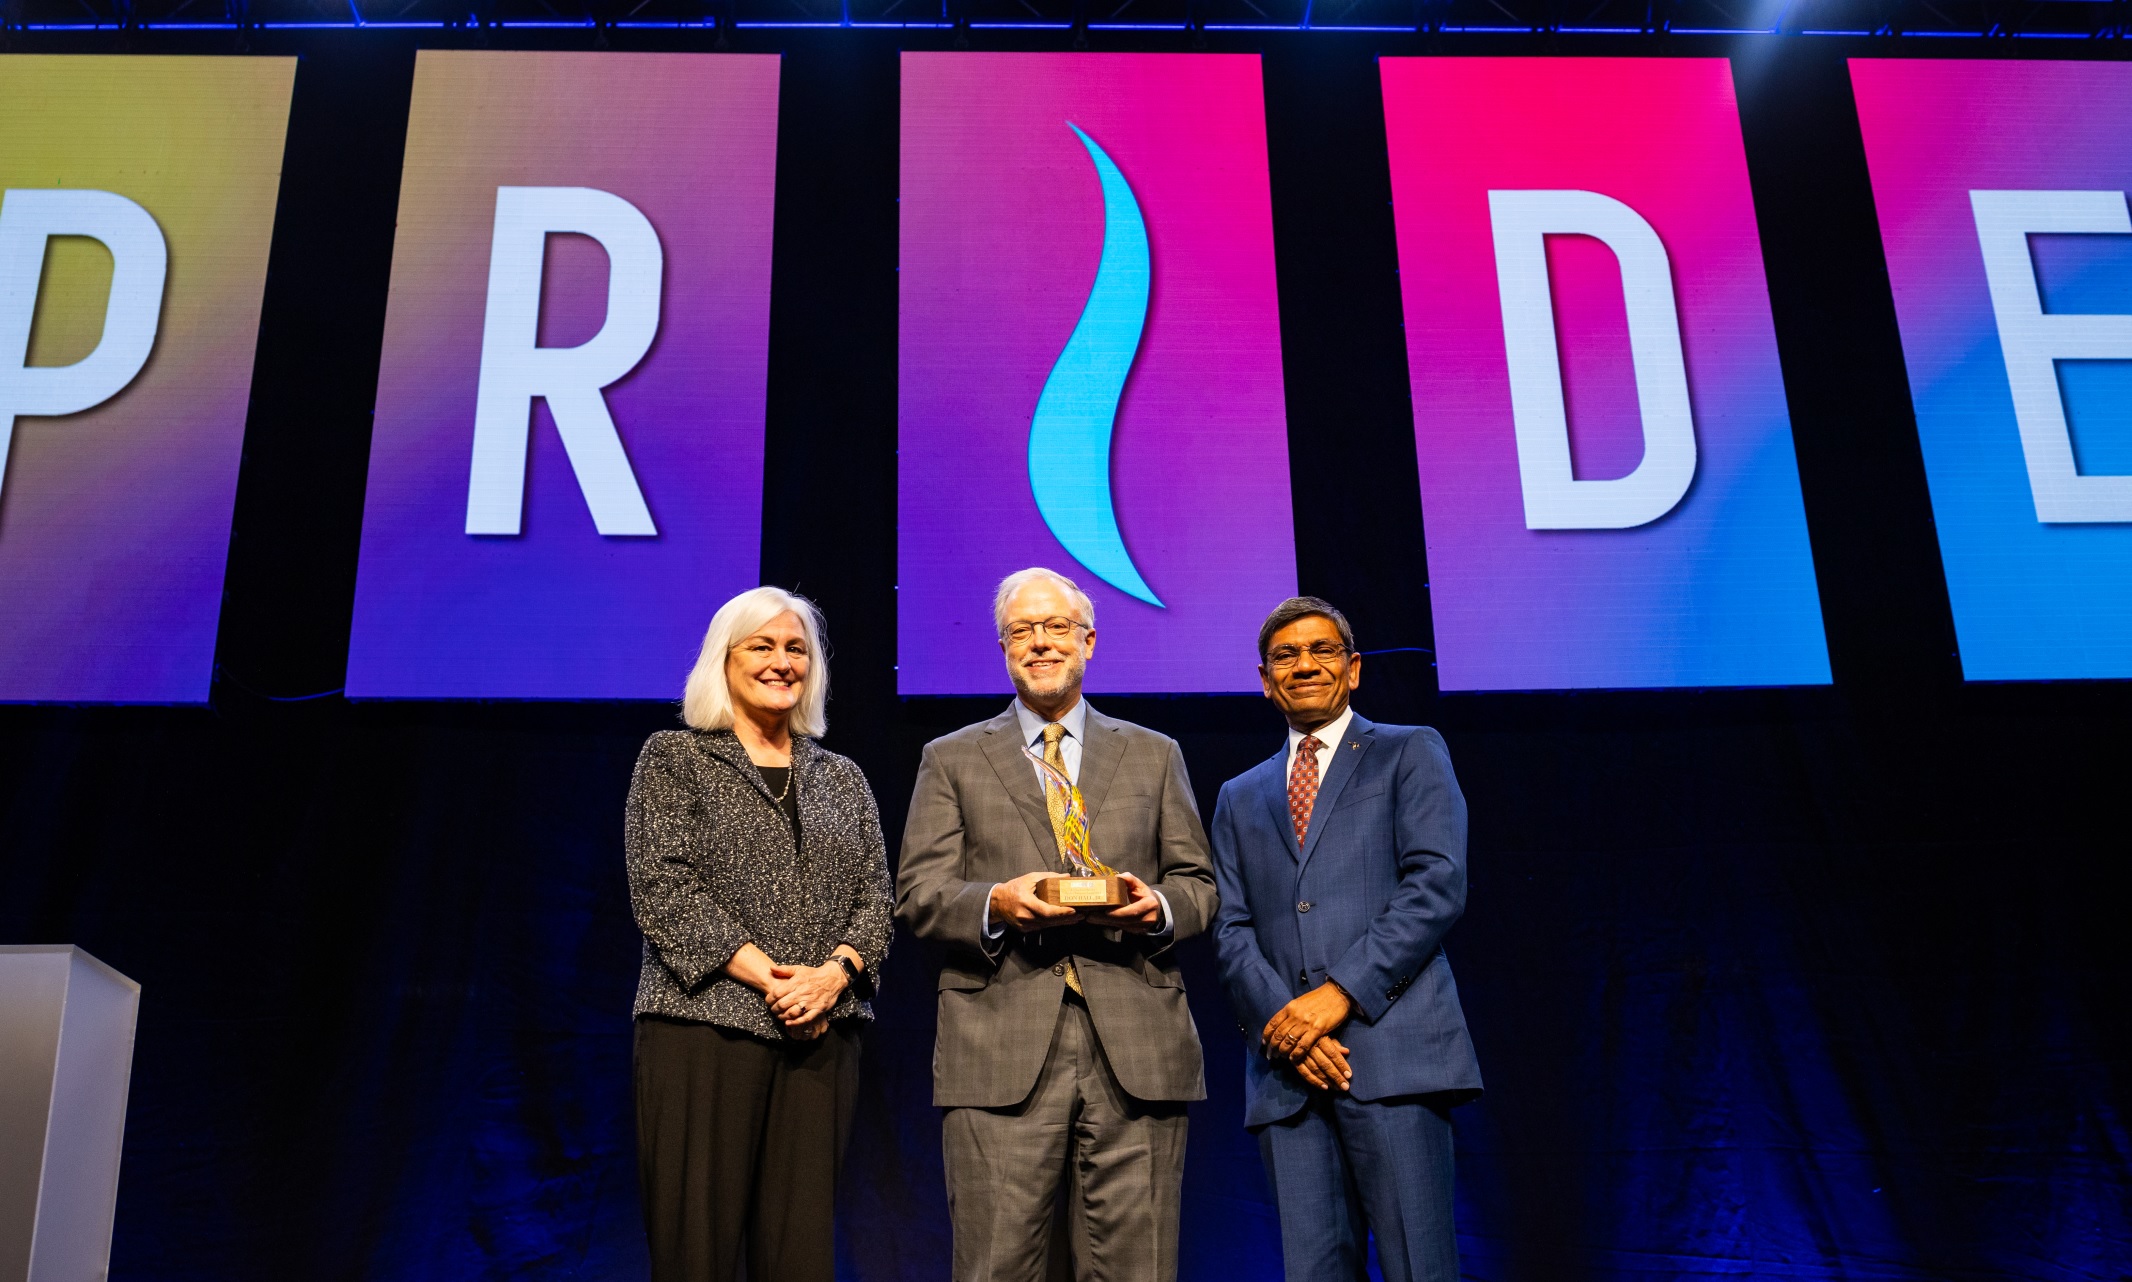 Madeline McDonough, Don Hall Jr. and Chancellor Mauli Agrawal on stage. The large screen behind them reads "PRIDE" in colorful letters.